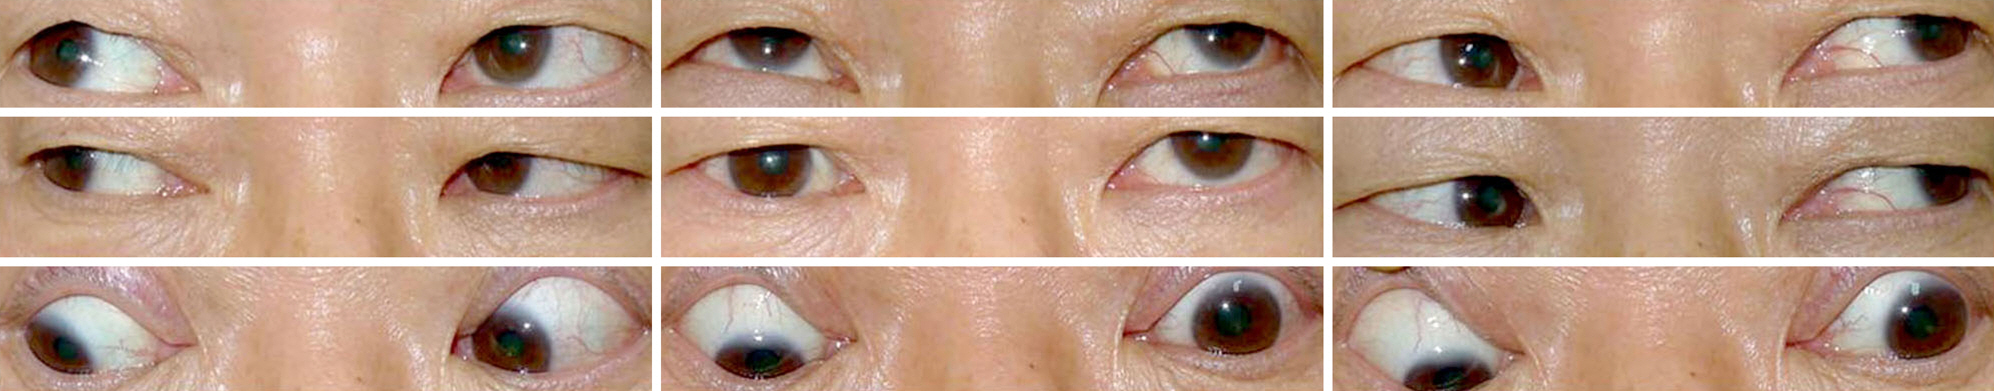 Preoperative clinical 9 gaze photographs of the patient showing over